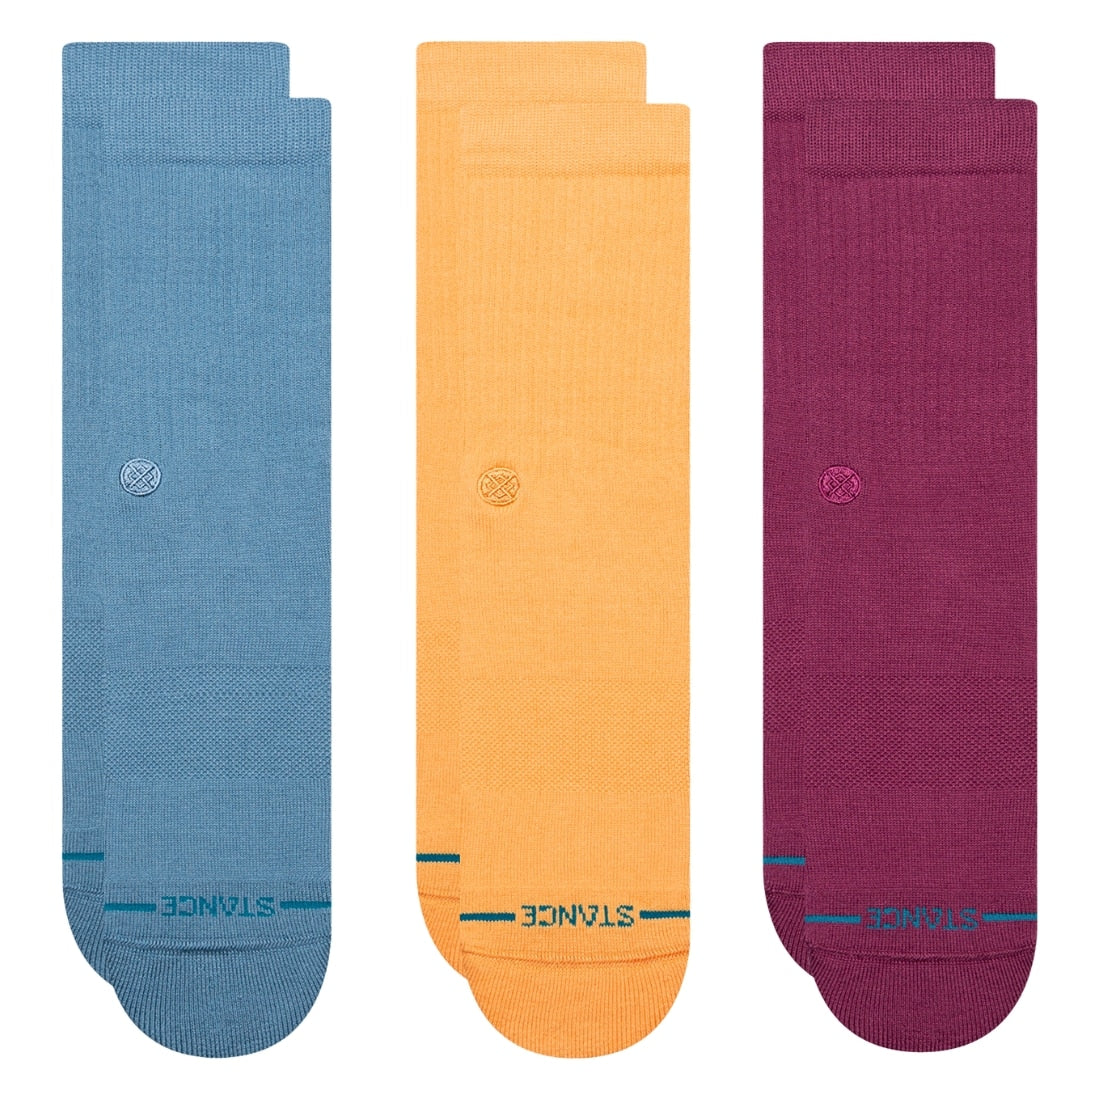 Stance Icon 3 Pack Of Socks - Dragon - Mens Crew Length Socks by Stance